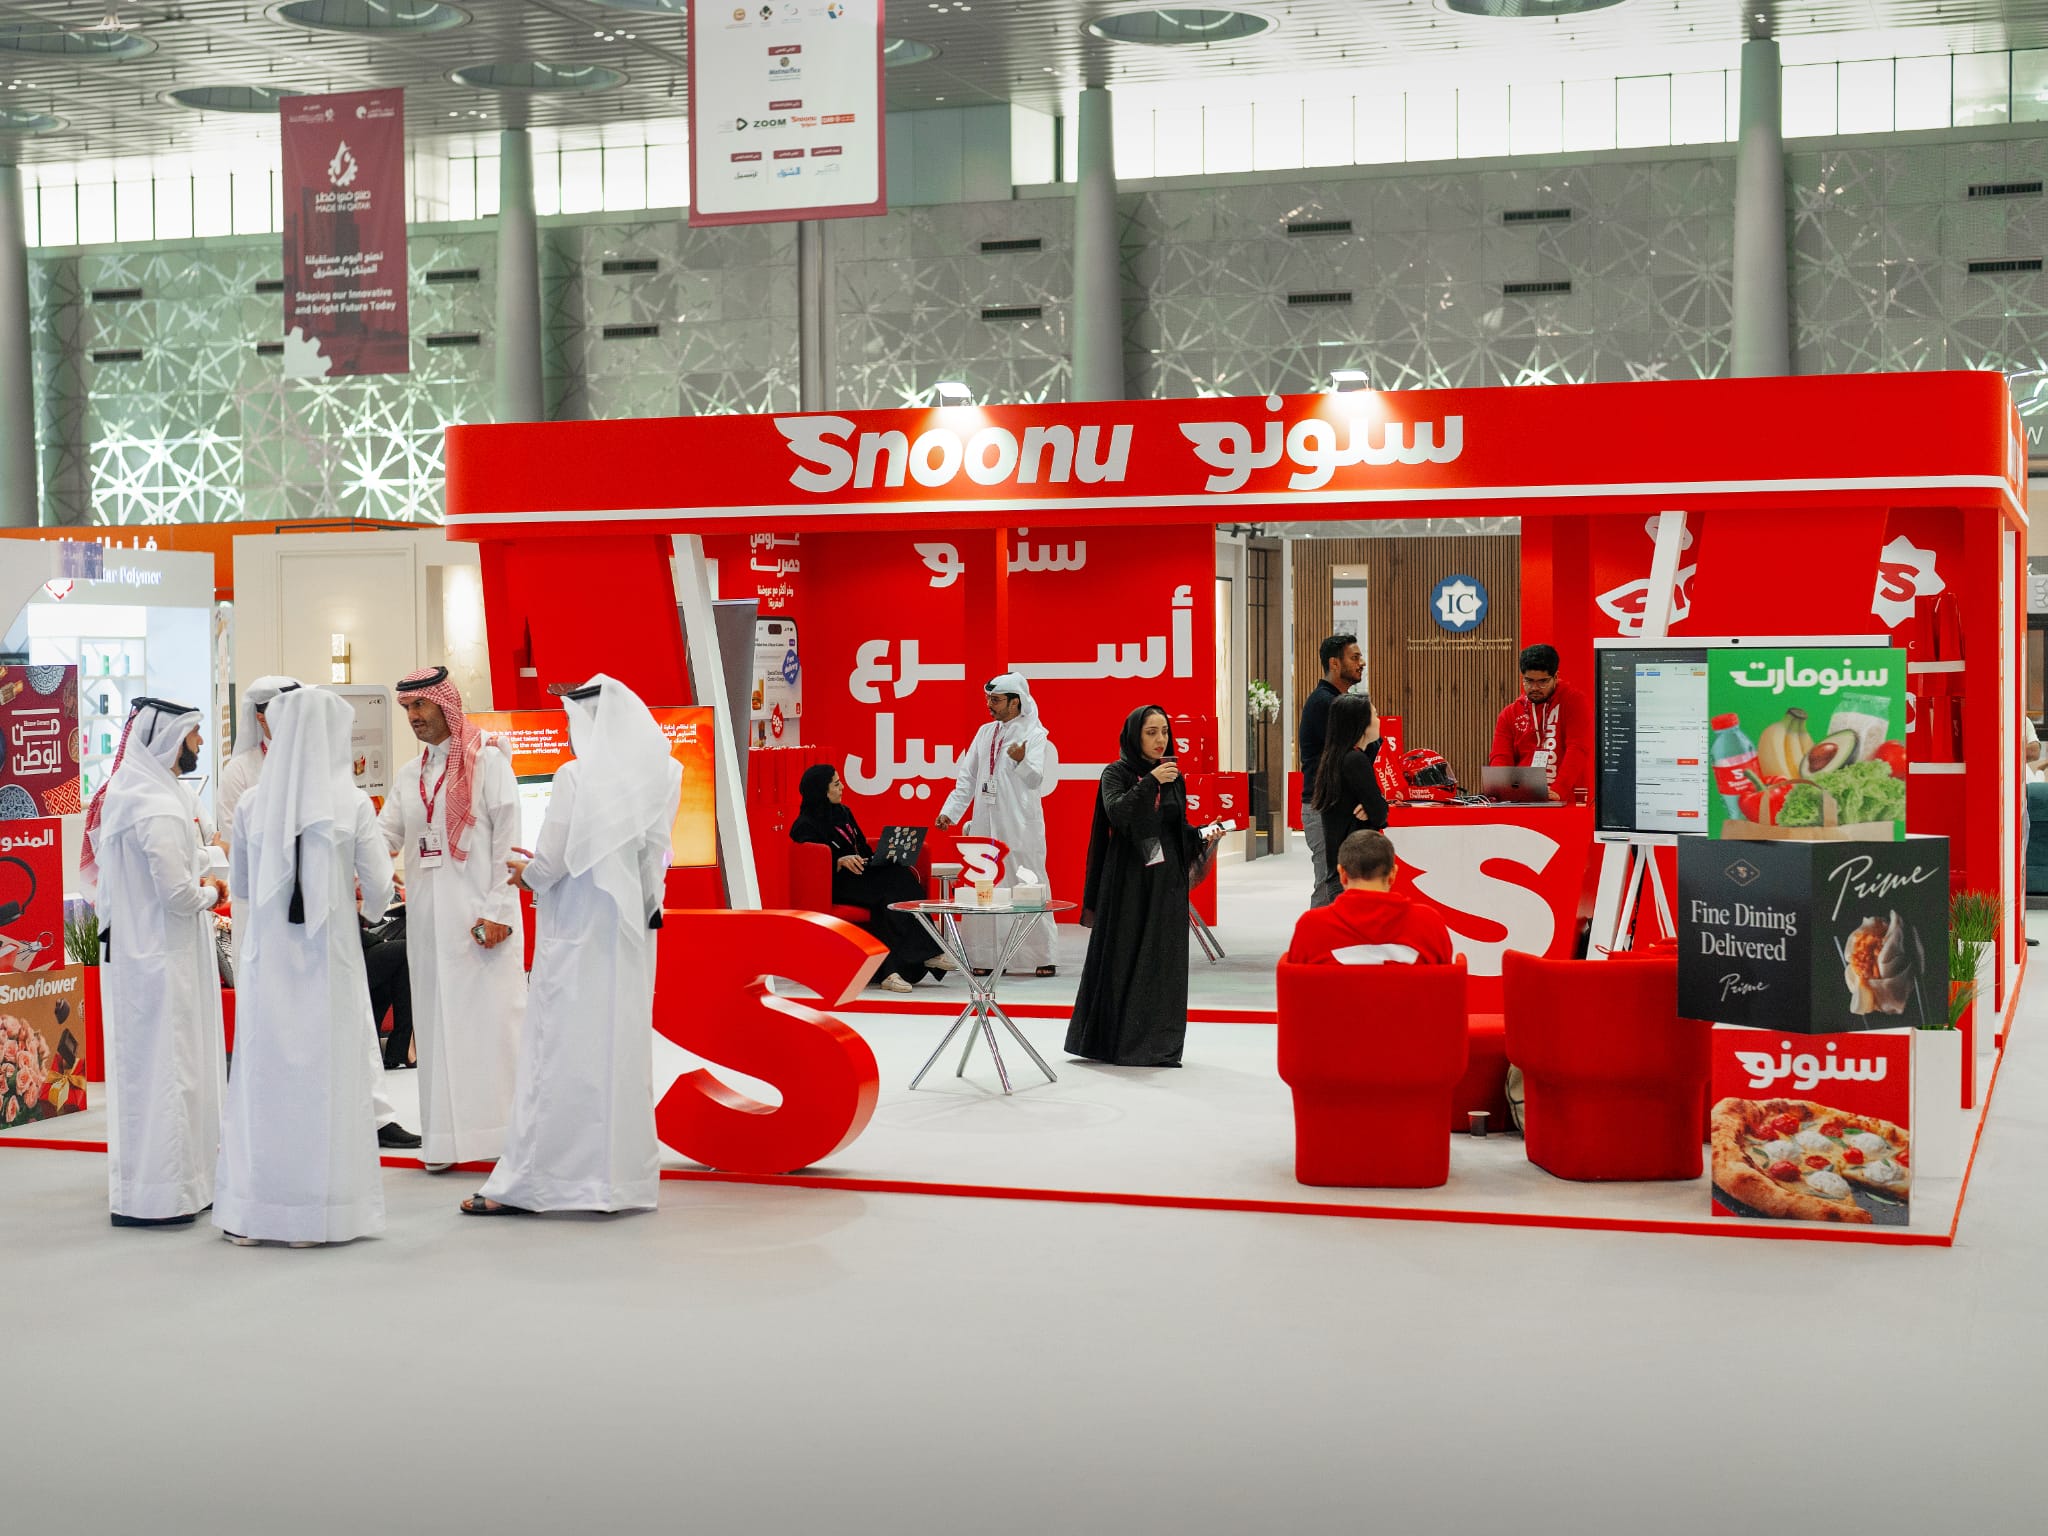 Snoonu is sponsoring the 'Made in Qatar' exhibition as a way to show its dedication to growing the local talent pool and the economy of Qatar